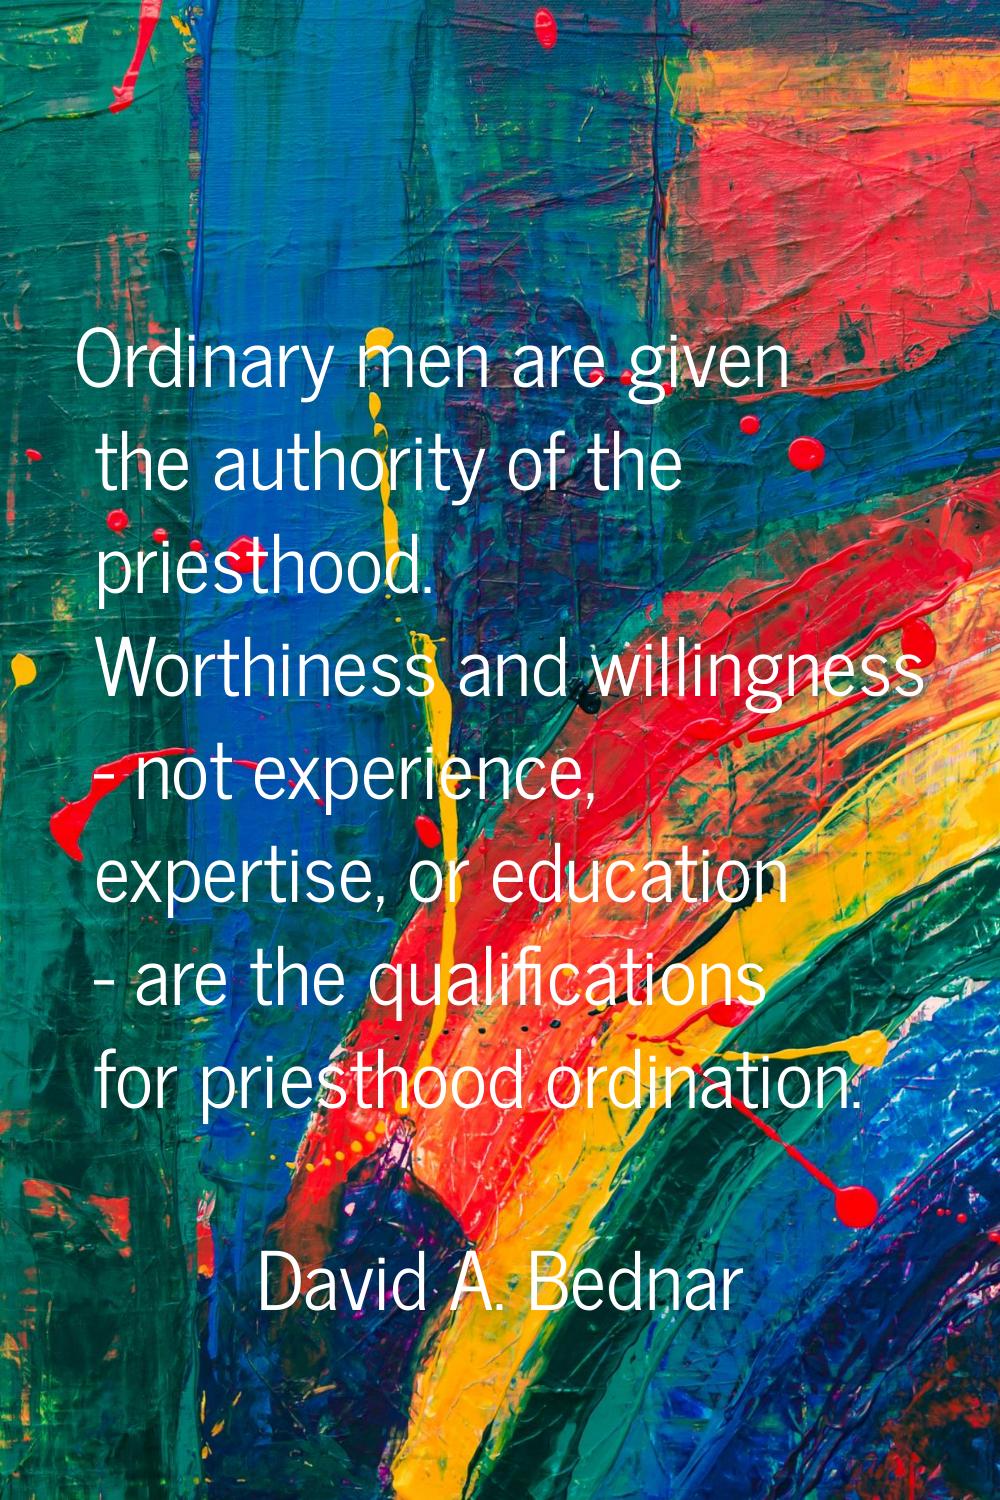 Ordinary men are given the authority of the priesthood. Worthiness and willingness - not experience